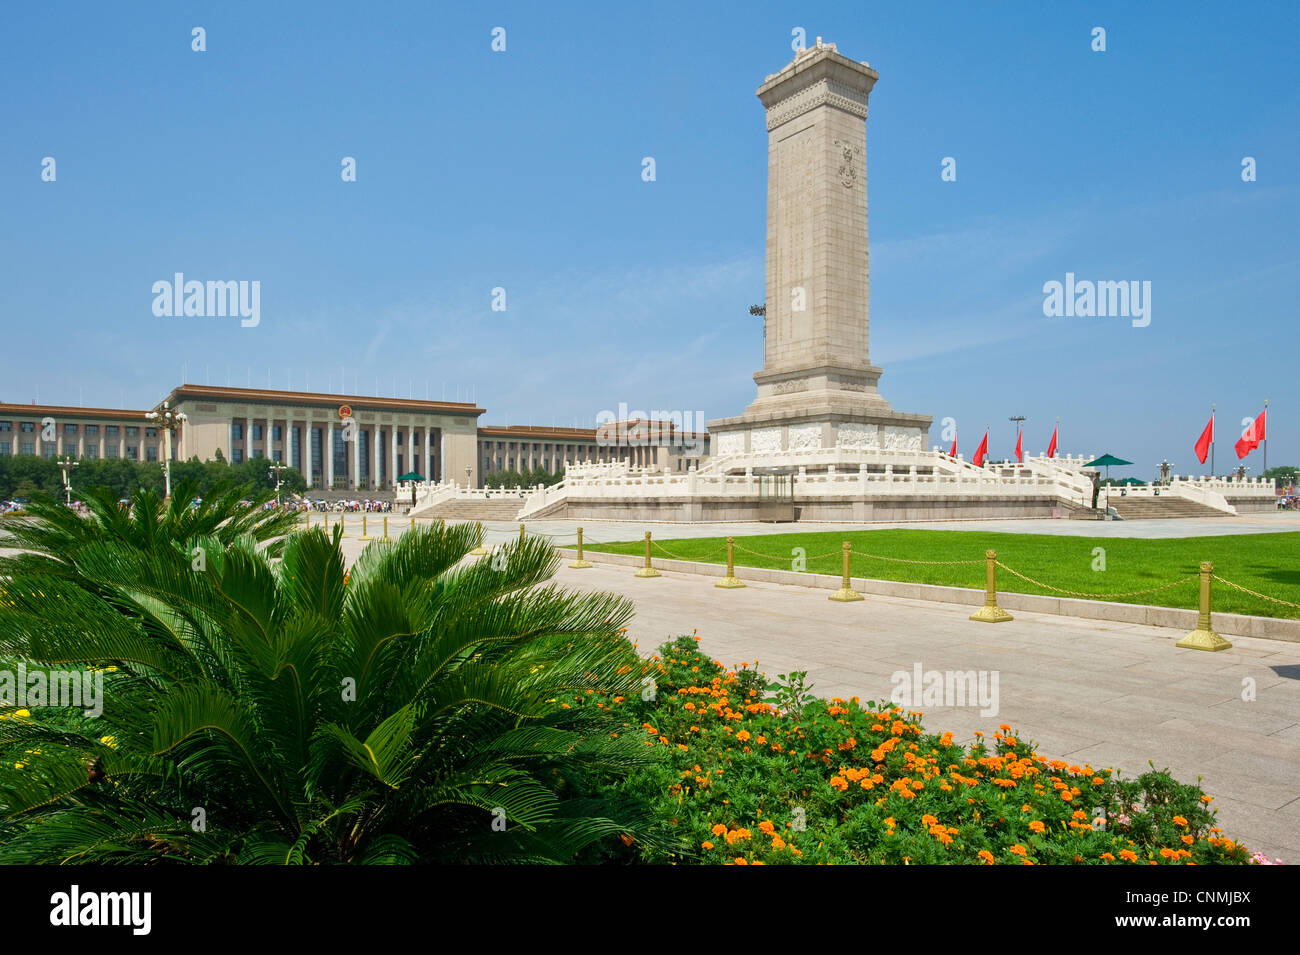 The Monument to the People's Heroes in Tiananmen Square, Beijing. Stock Photo